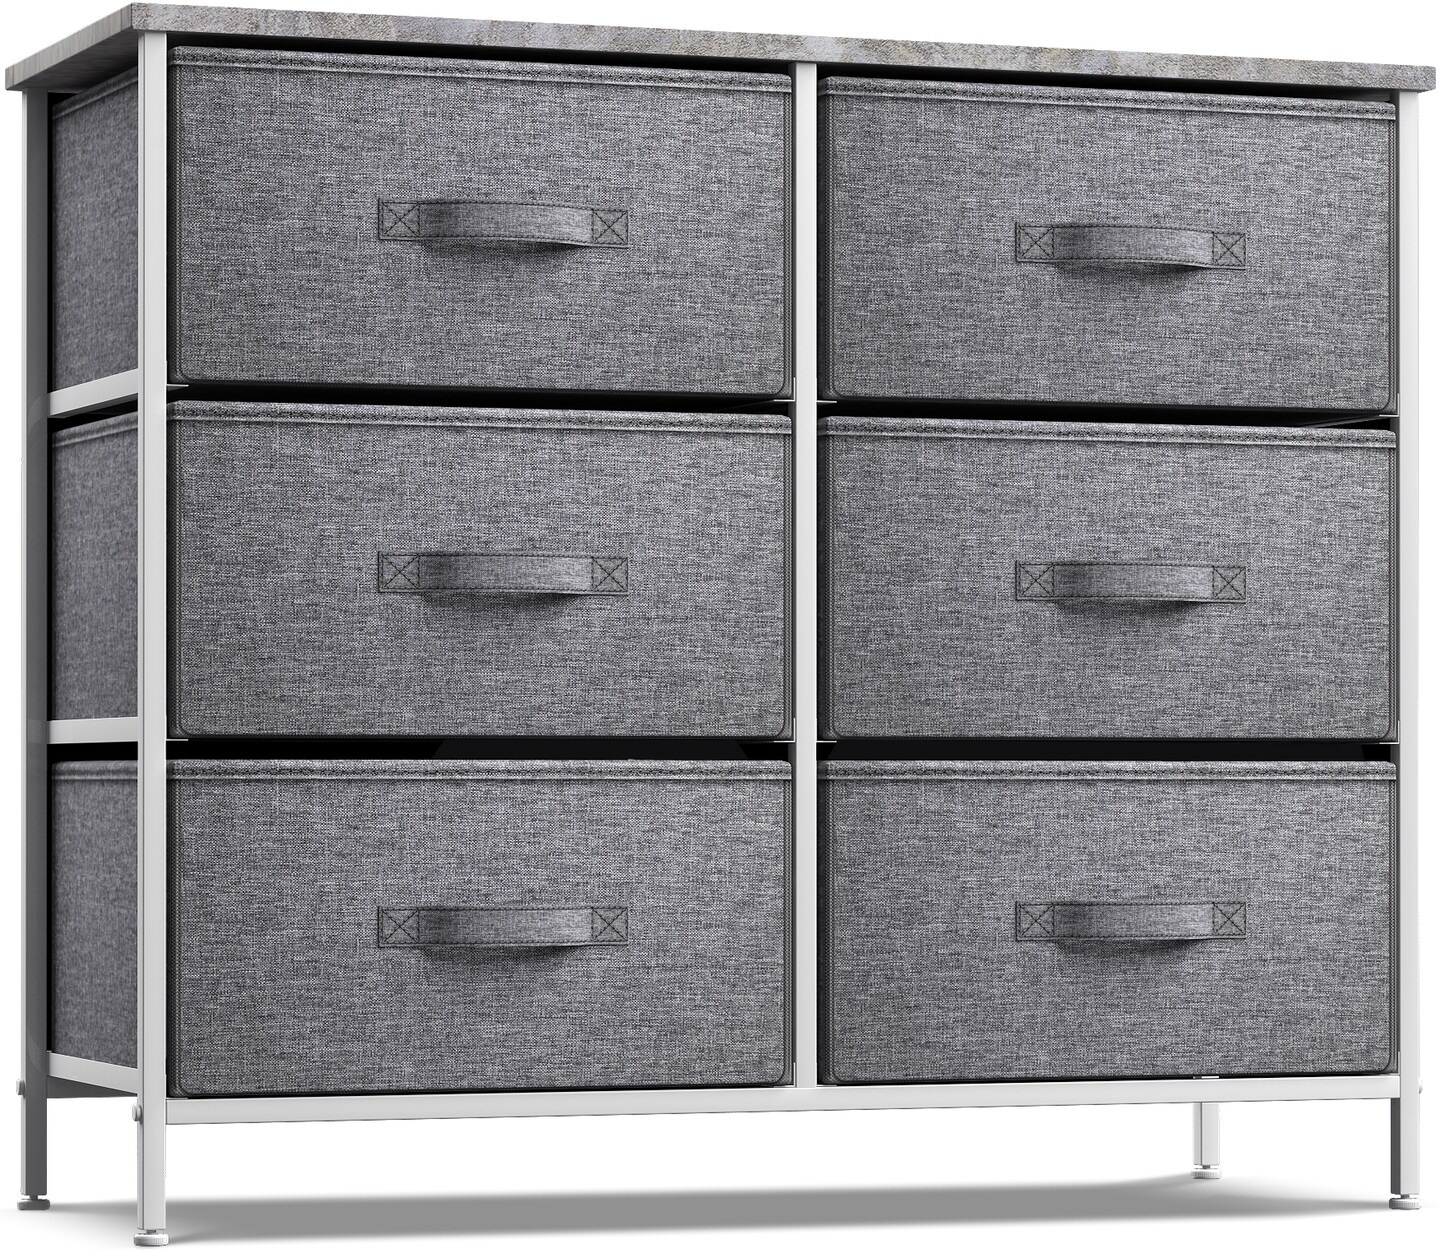 Sorbus 6 Drawers Dresser- Storage Unit with Steel Frame, Wood Top, Fabric Bins - for Bedroom, Closet, Office and more